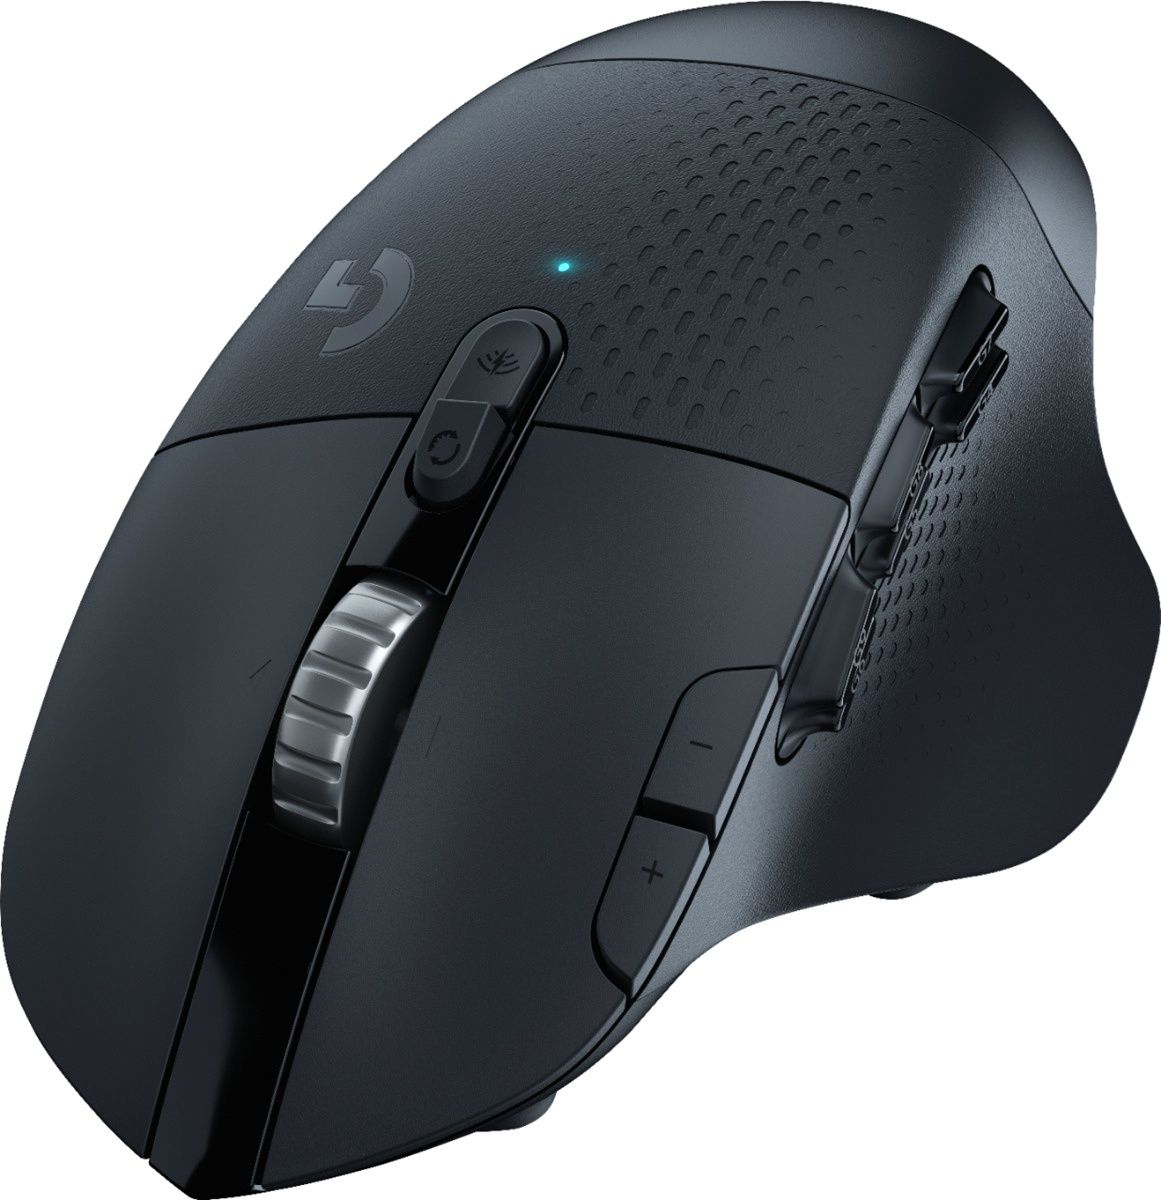 The Logitech G604 LIGHTSPEED mouse is fast wireless mouse with a 25K DPI sensor, fast scrolling, and two wireless modes. It can last up to 240 hours on a single AA battery.